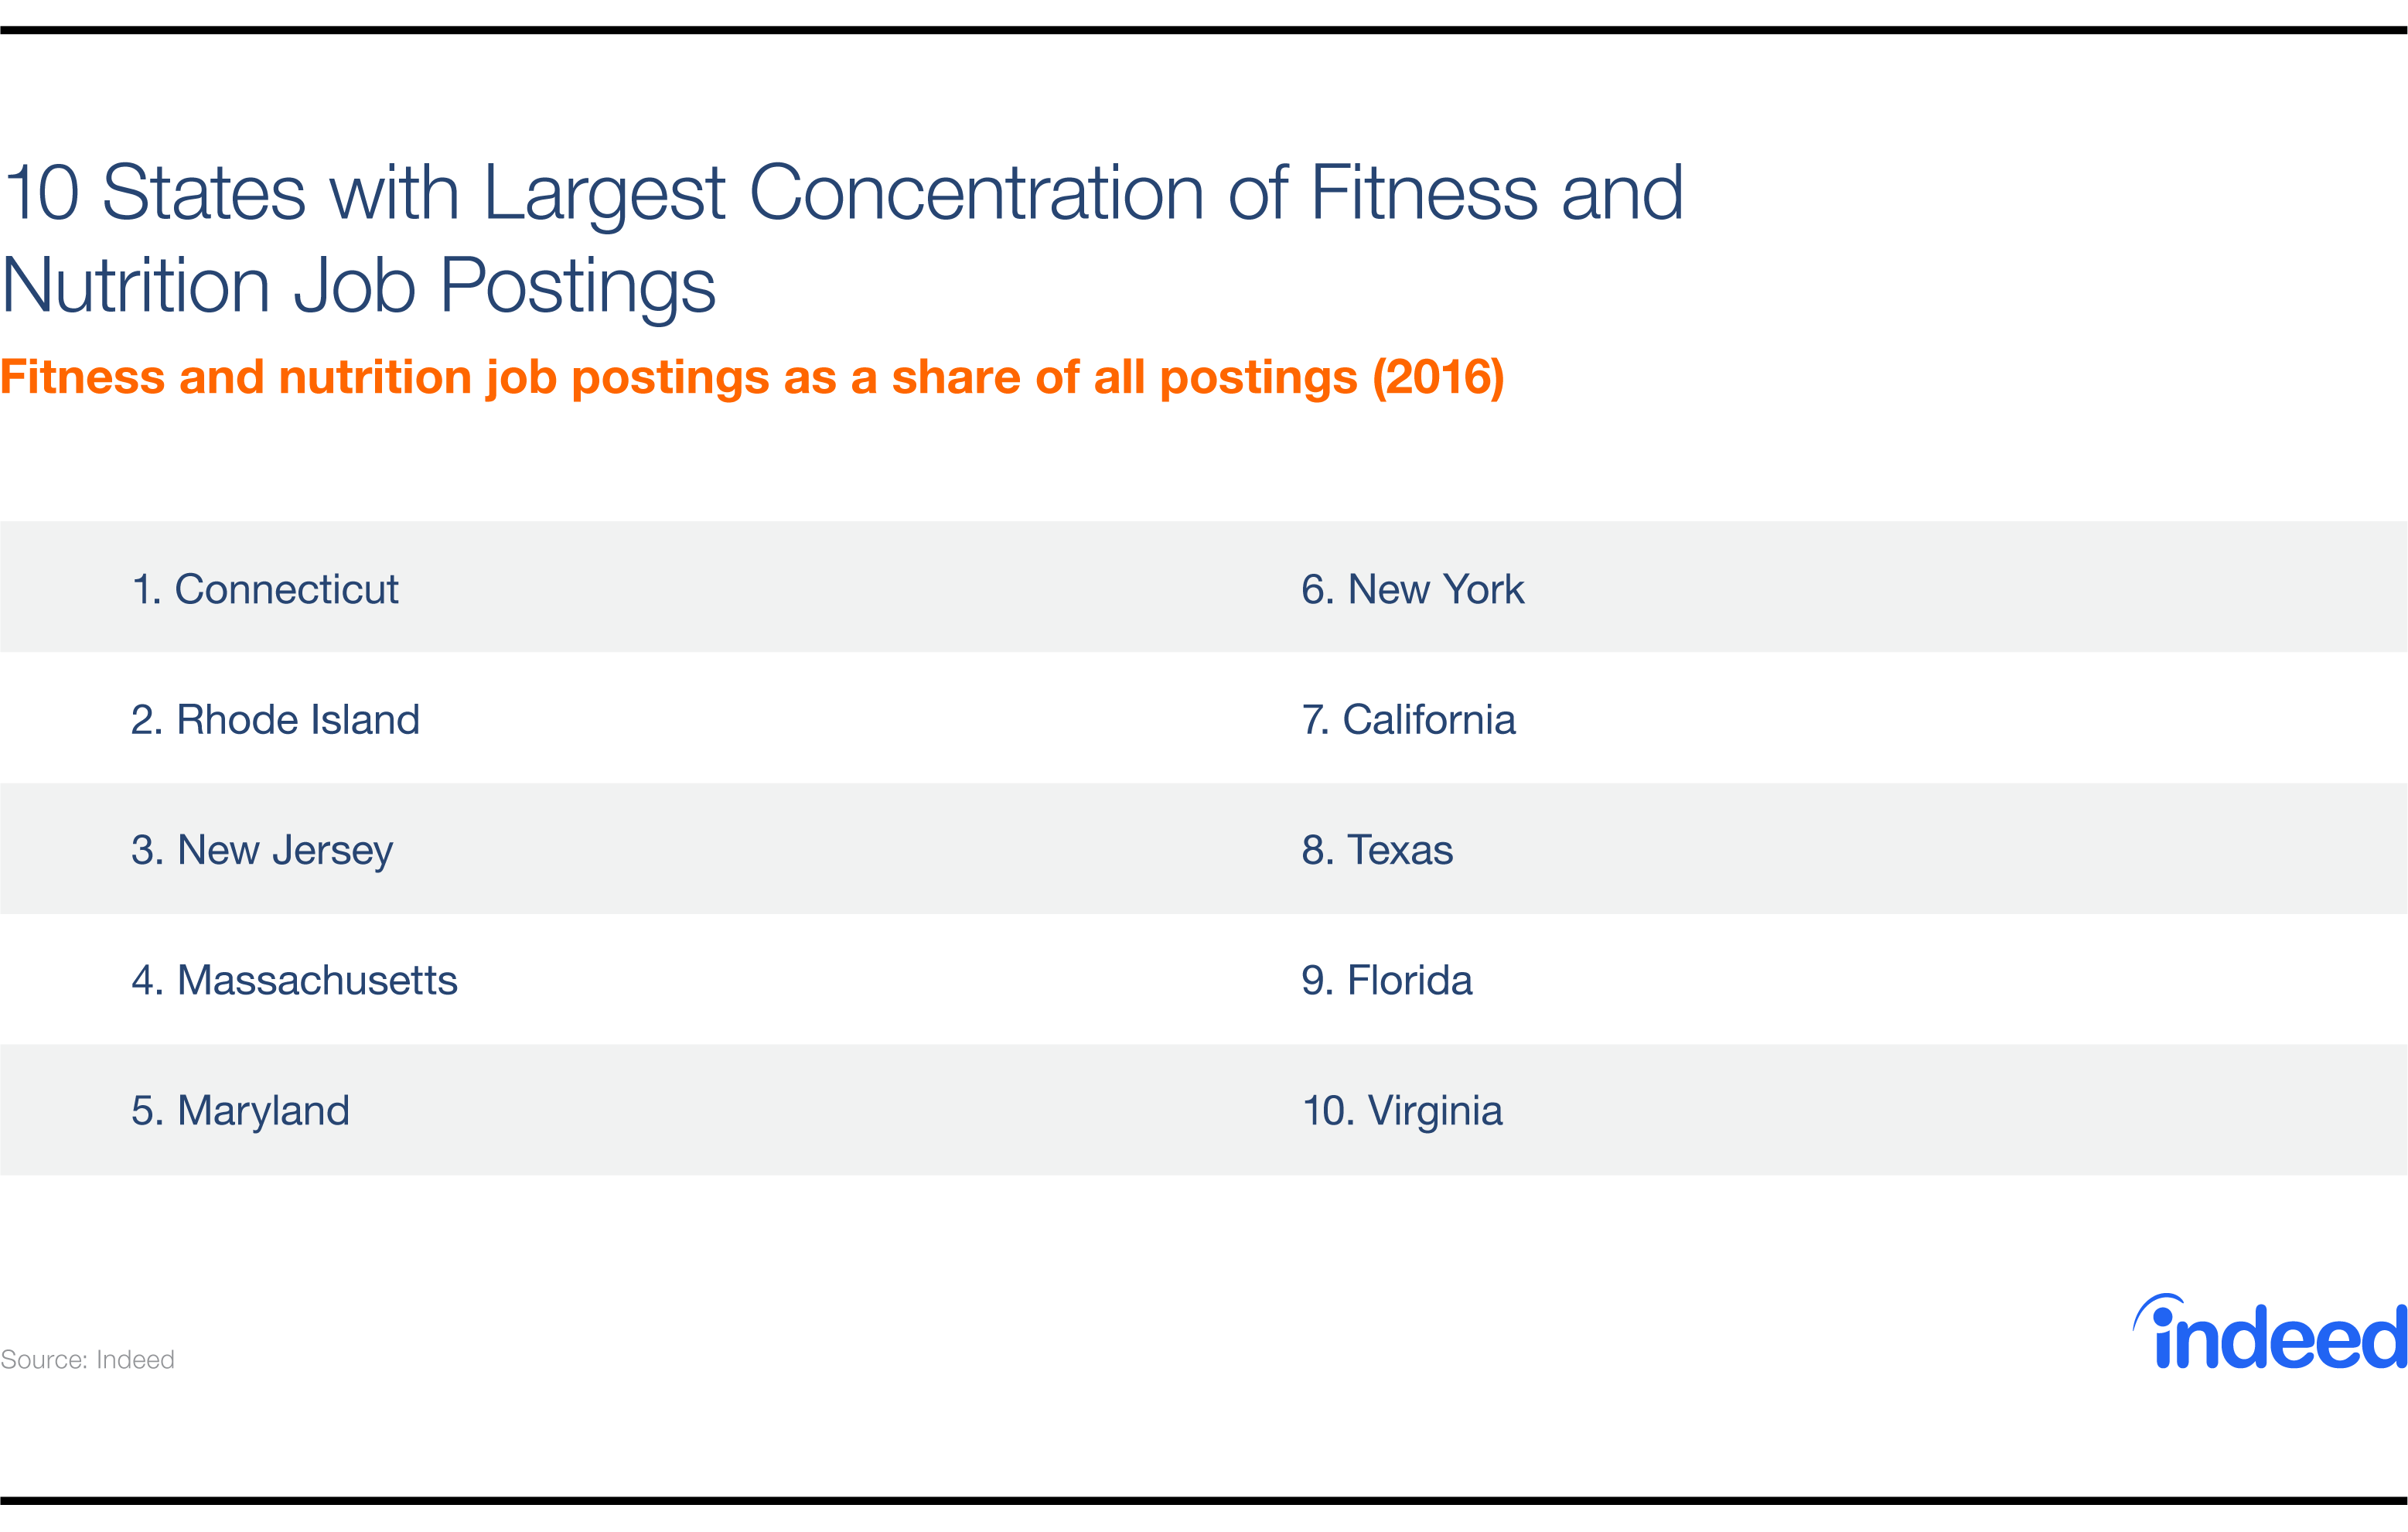 10 States with Largest Concentration of Fitness and Nutrition Job Postings